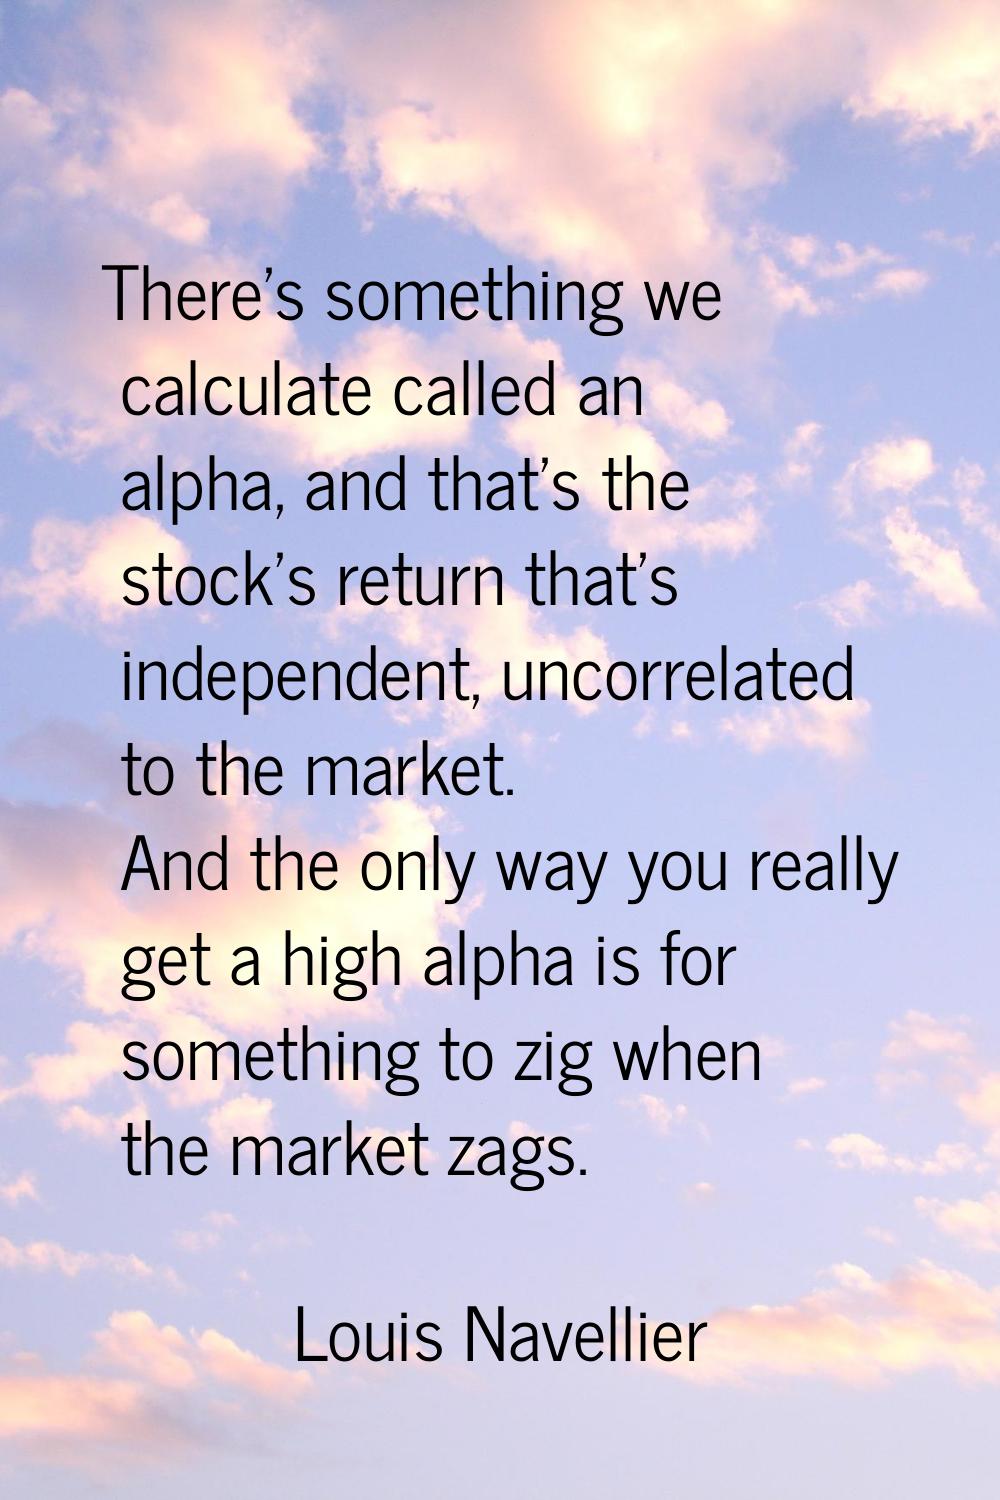 There's something we calculate called an alpha, and that's the stock's return that's independent, u